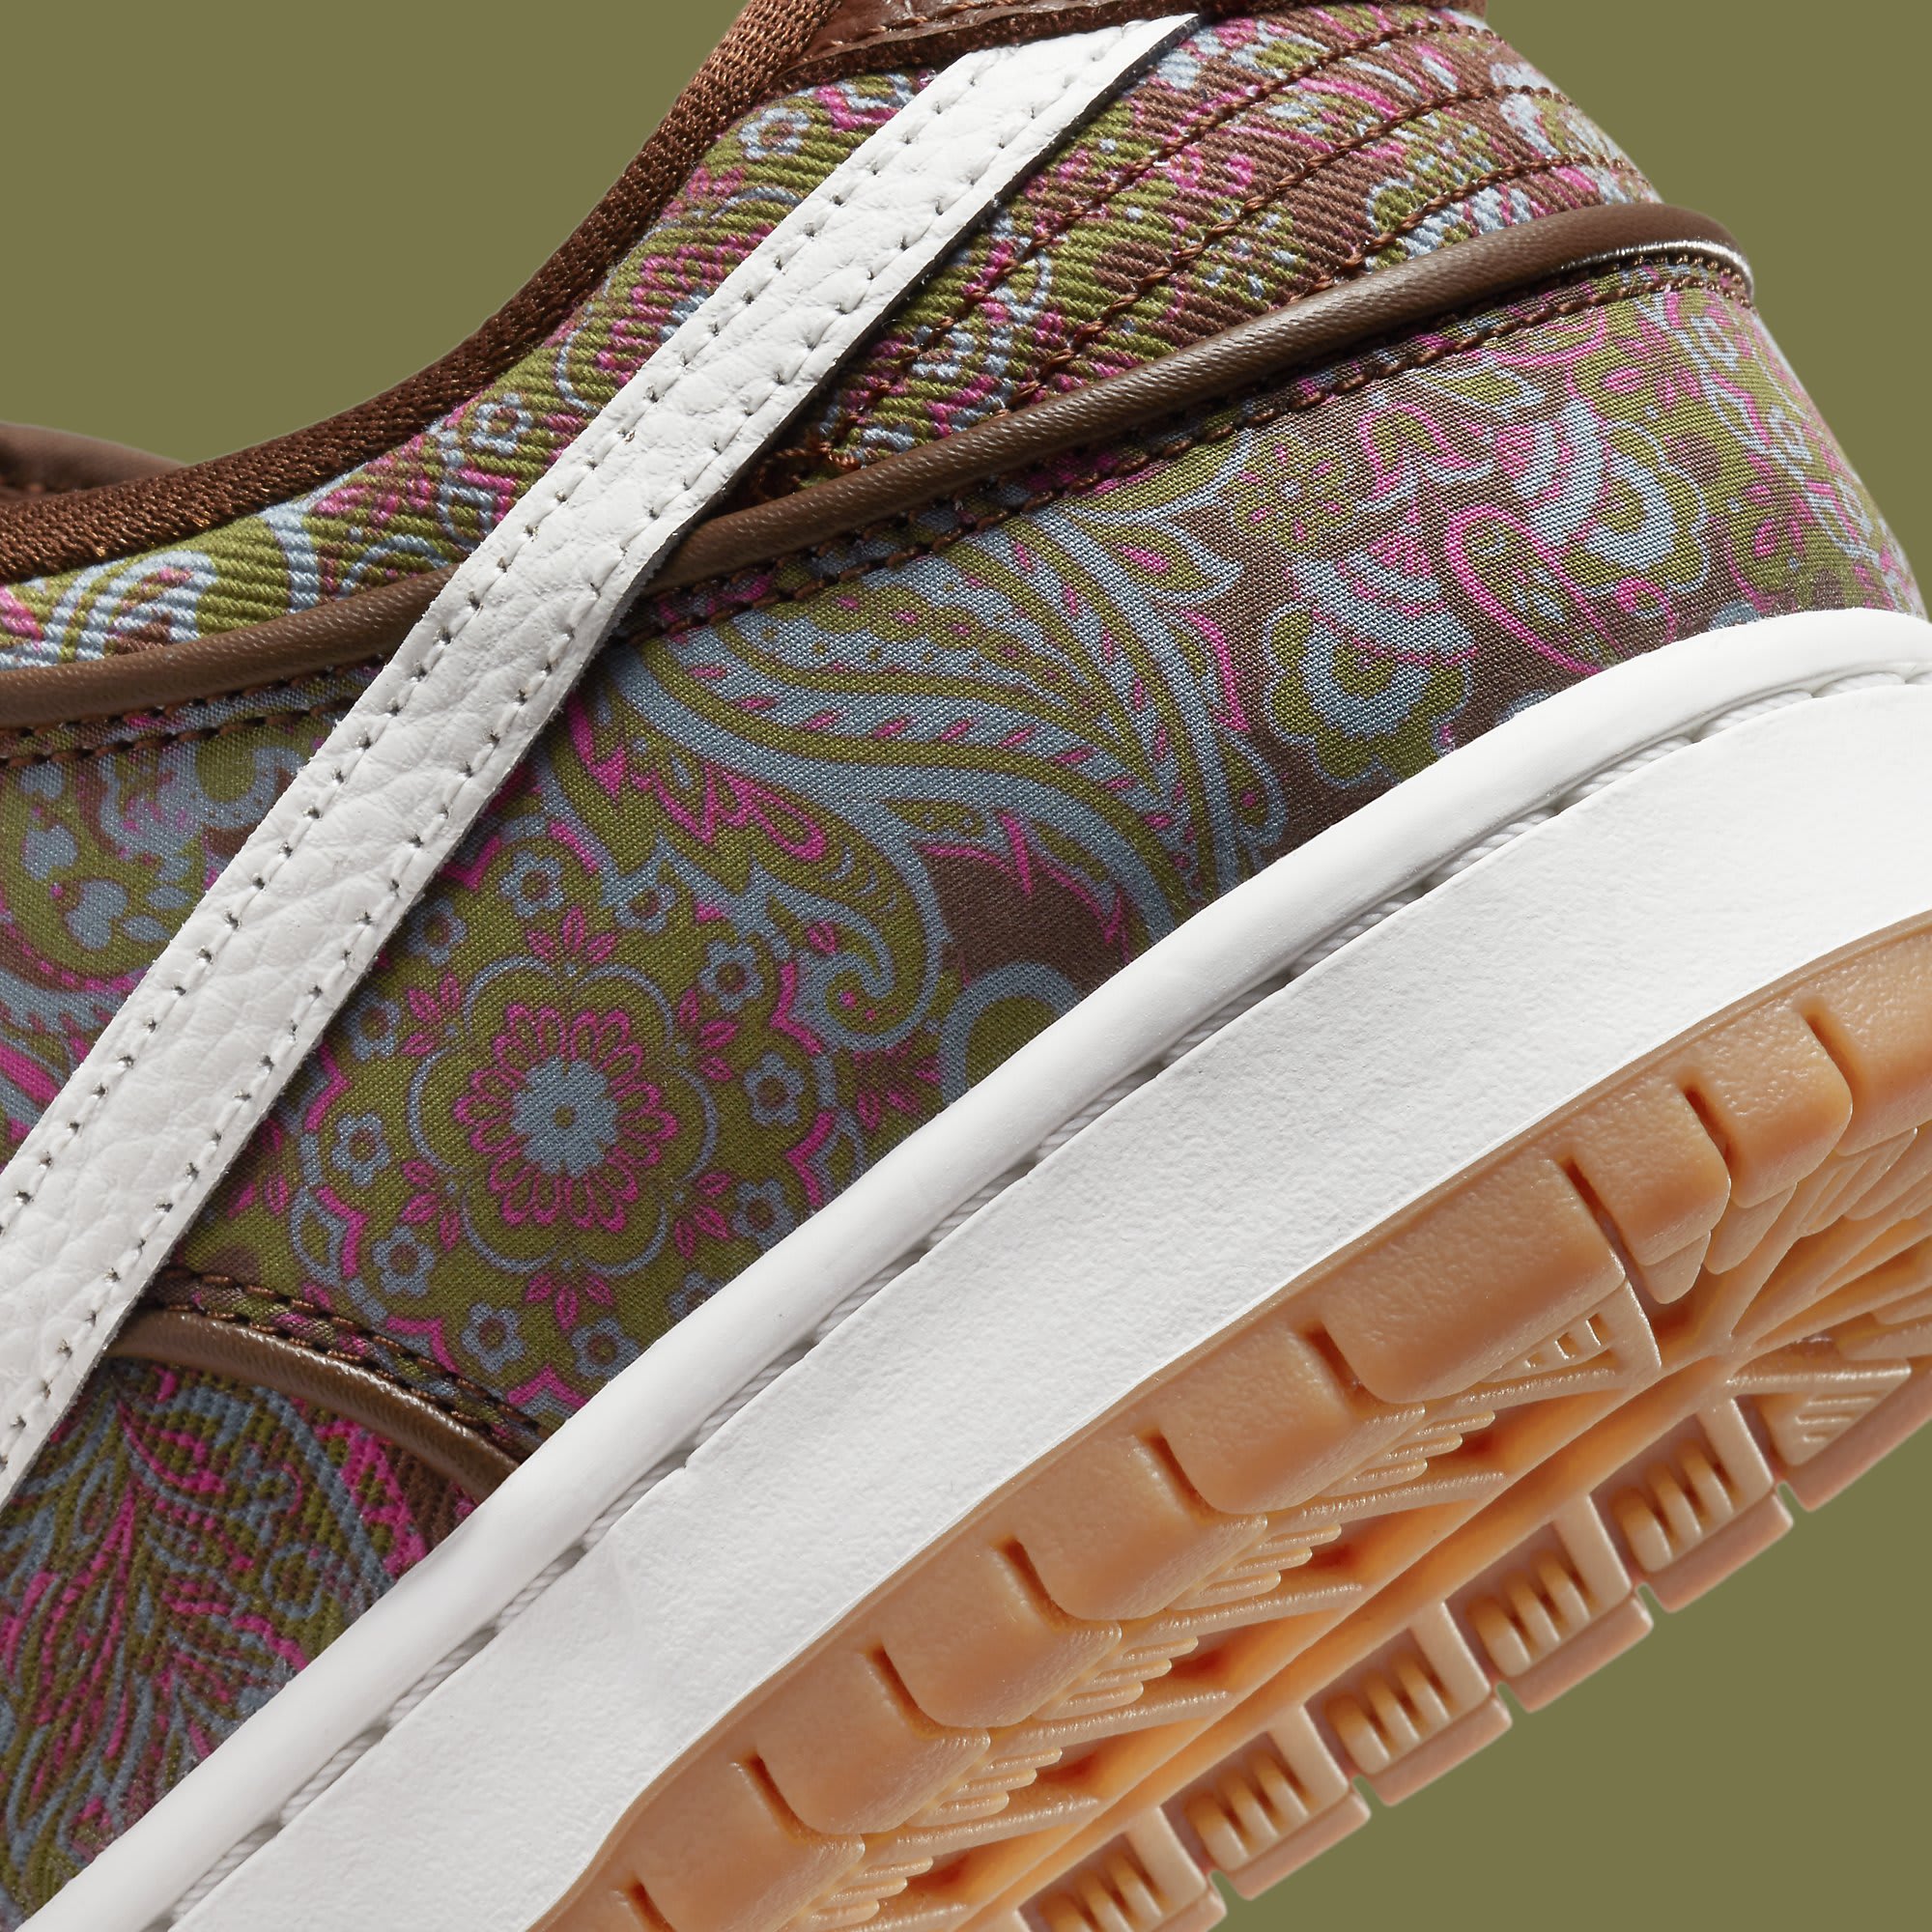 Paisley Prints Cover This Nike SB Dunk | Complex